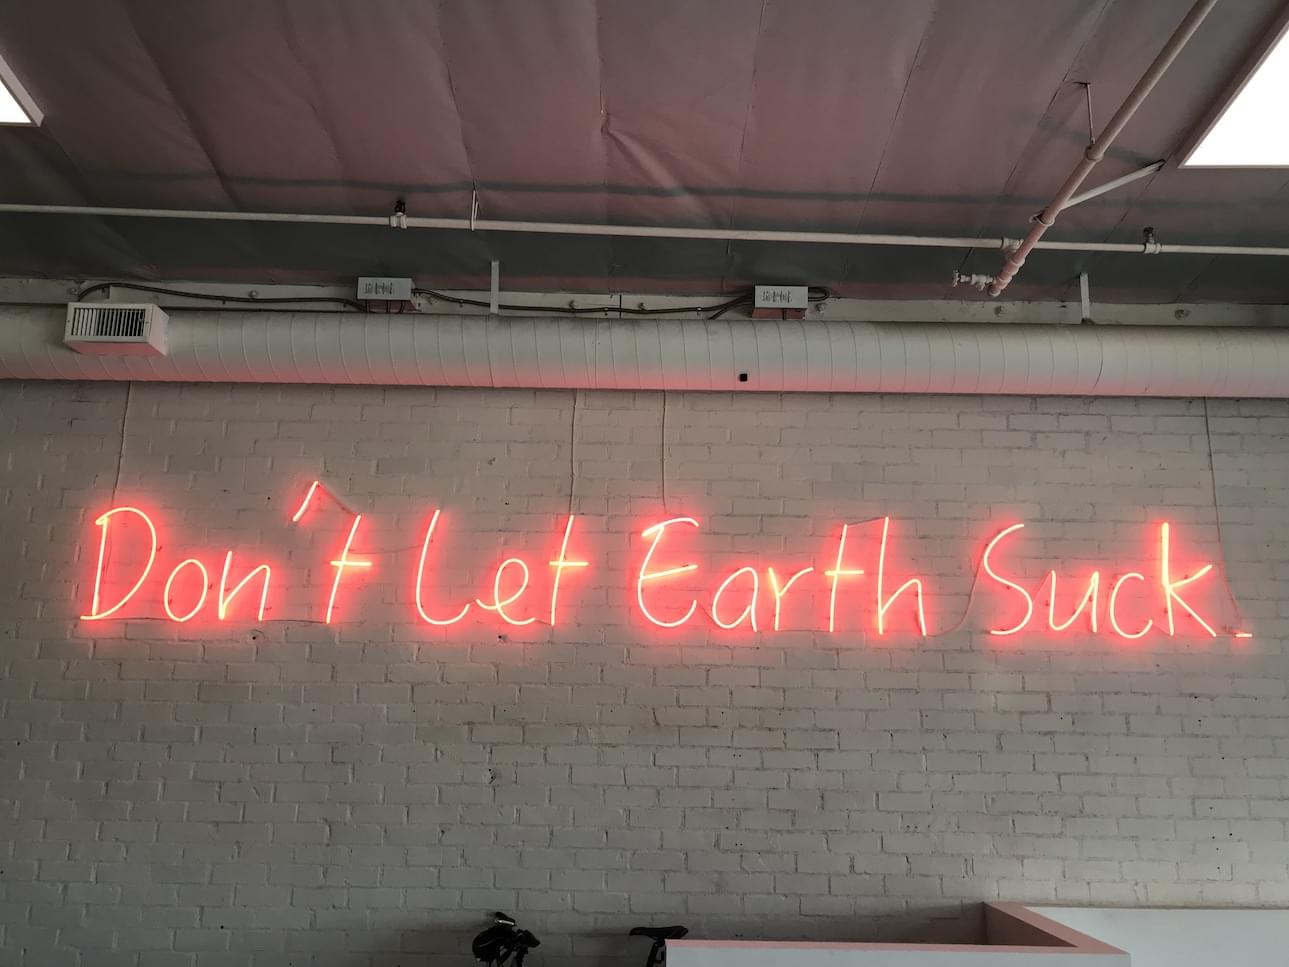 Our unofficial motto, blazing in the lobby at HQ